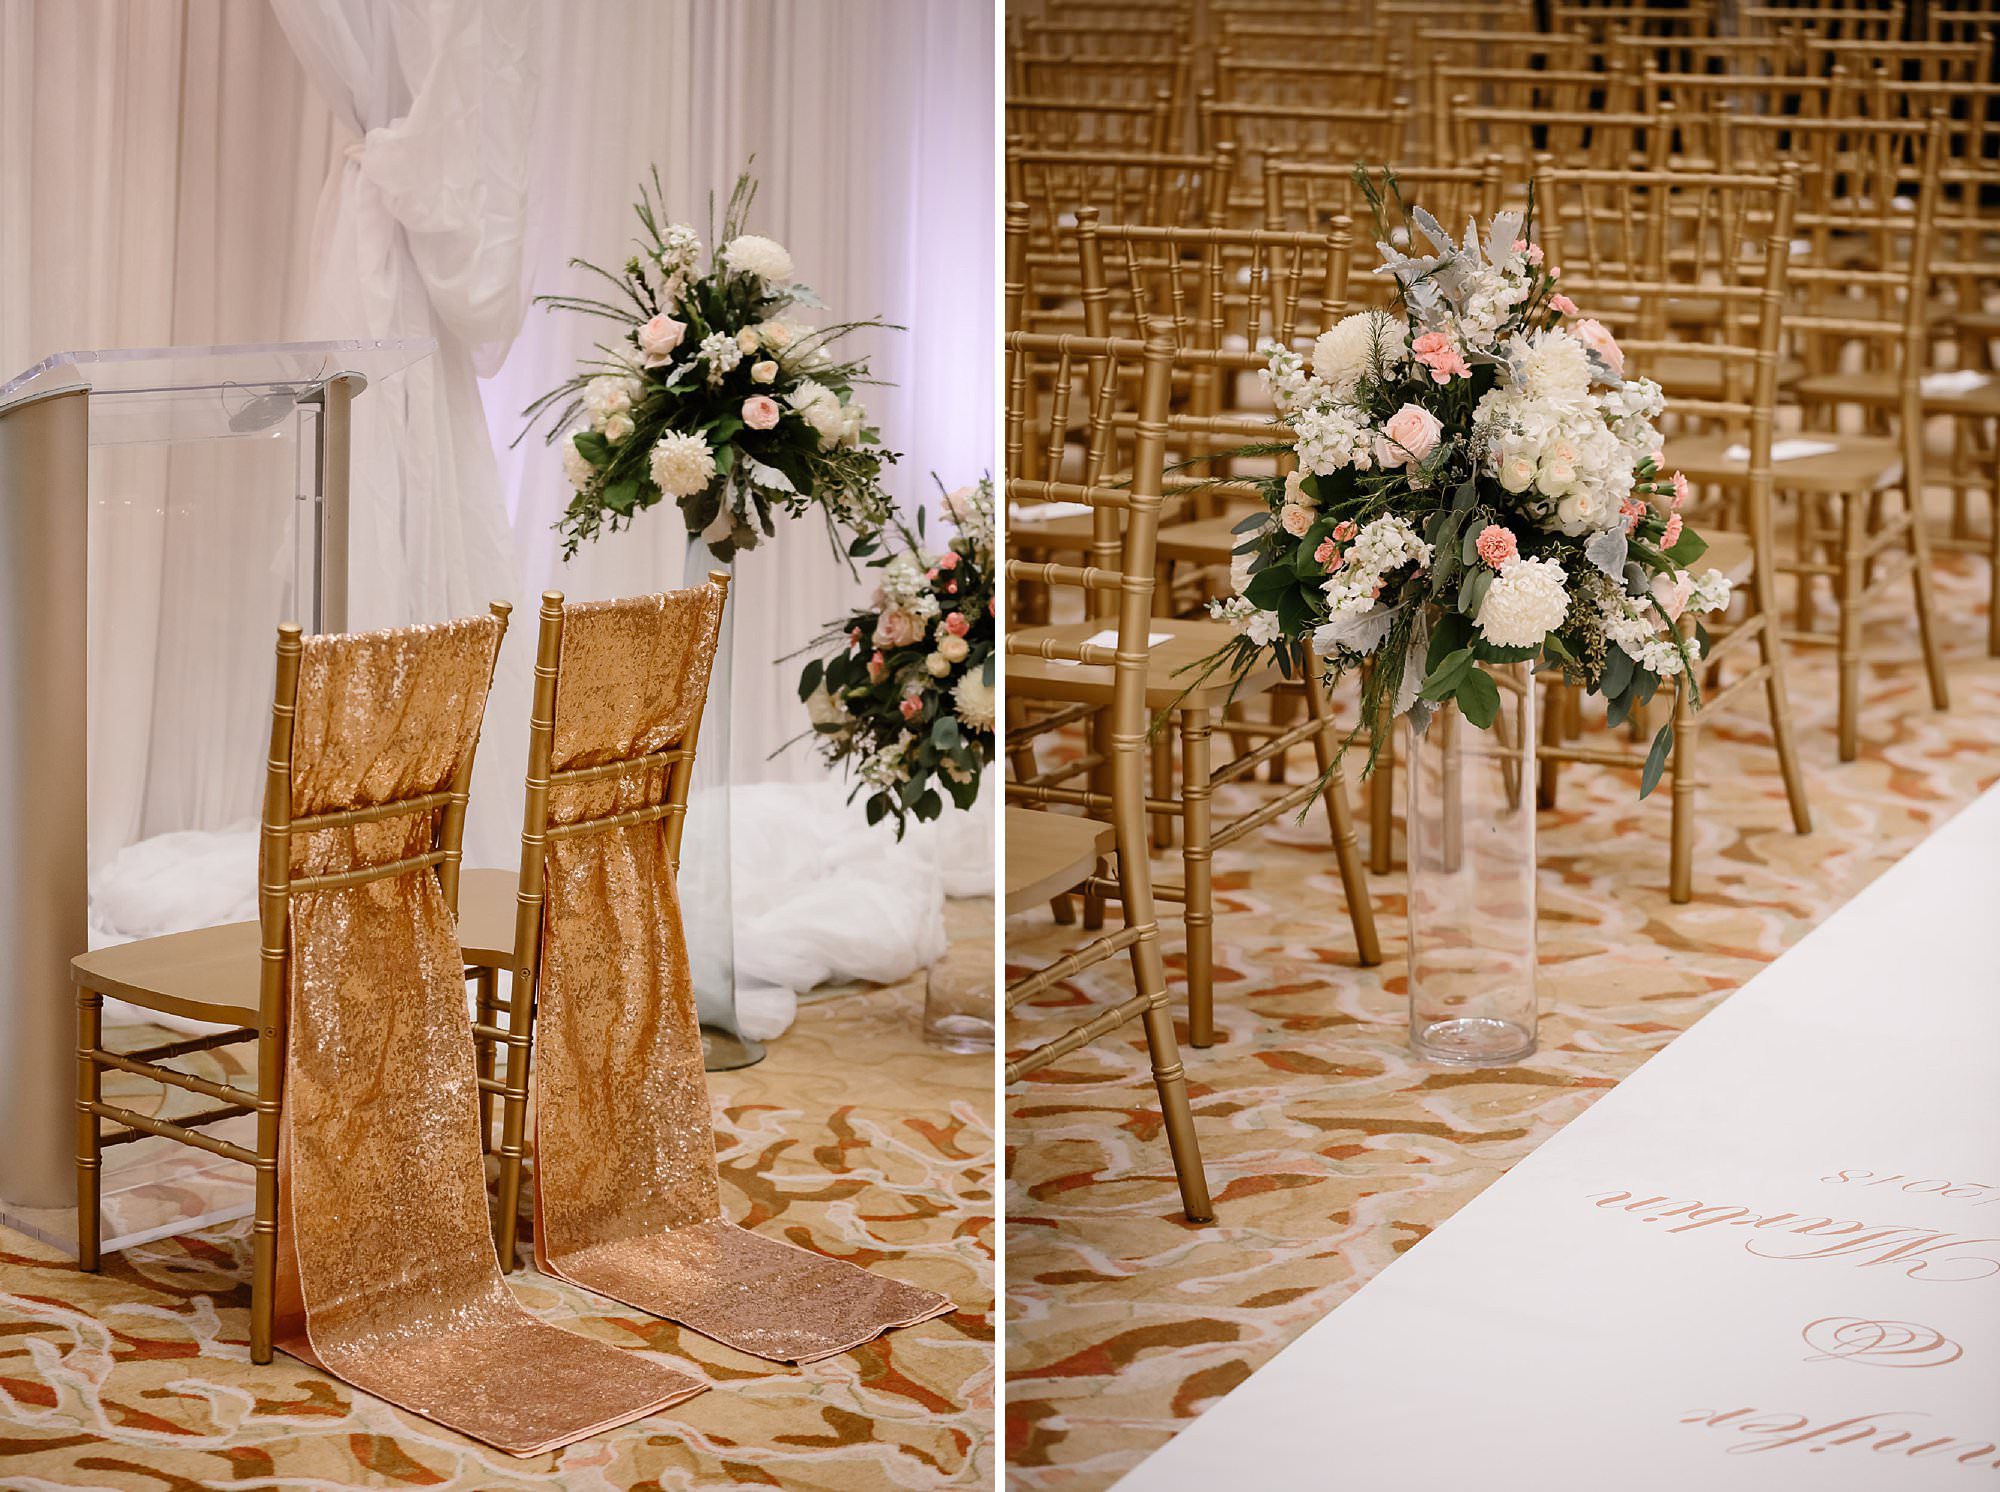 Pink and white floral decorations and gold accents for the indoor ceremony at the Henderson Beach Resort and Spa